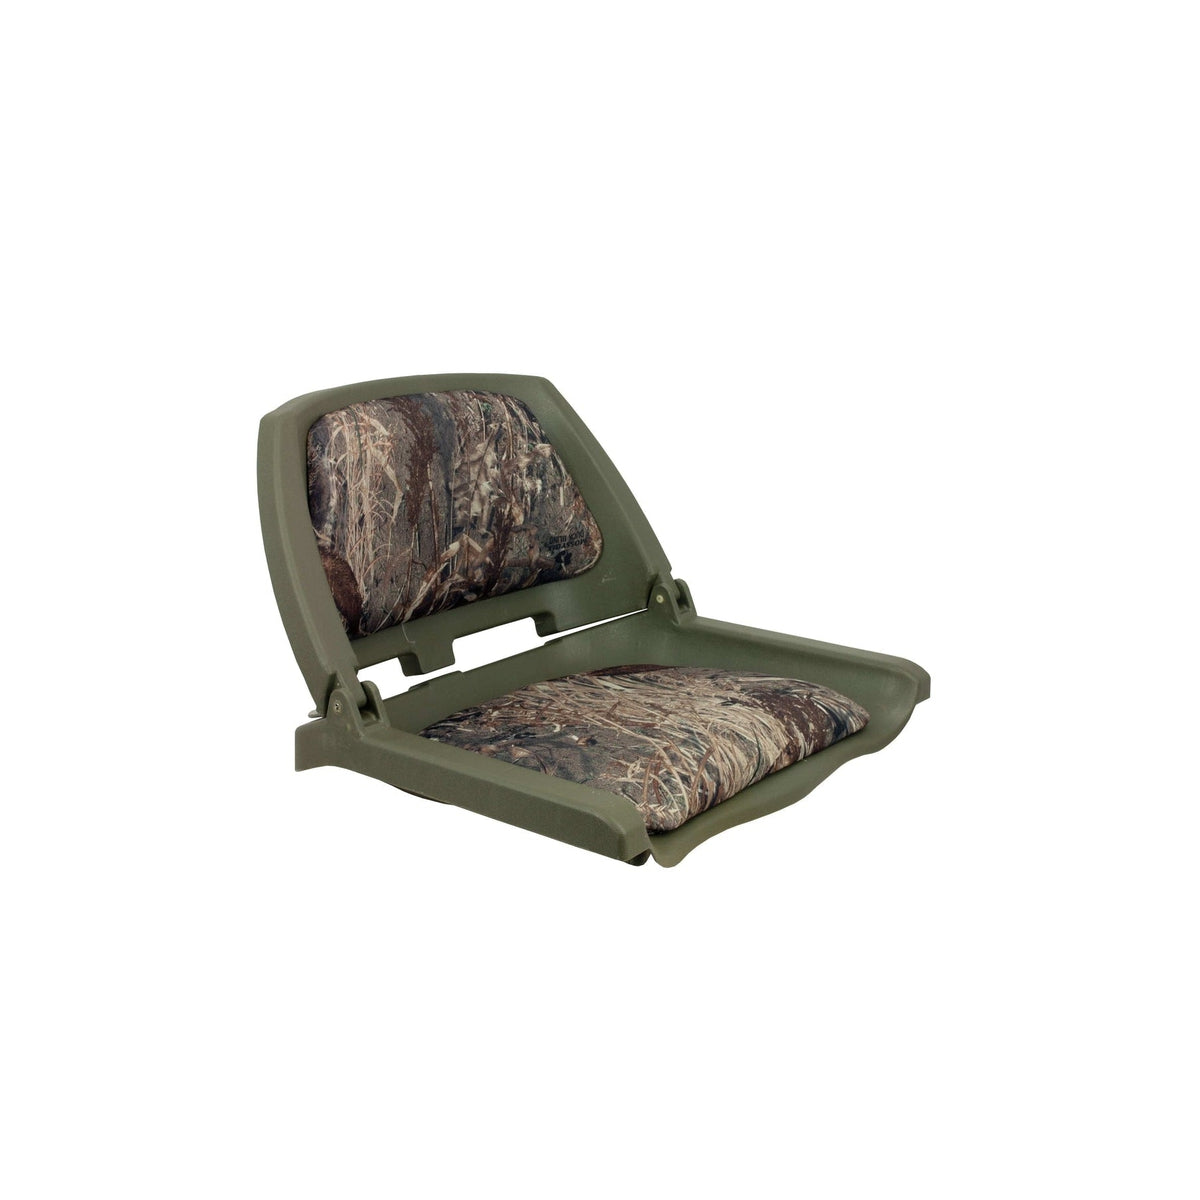 Springfield Not Qualified for Free Shipping Springfield Traveler Folding Seat Green with Mossy Oak Duck Blind Cushion #1061107-C